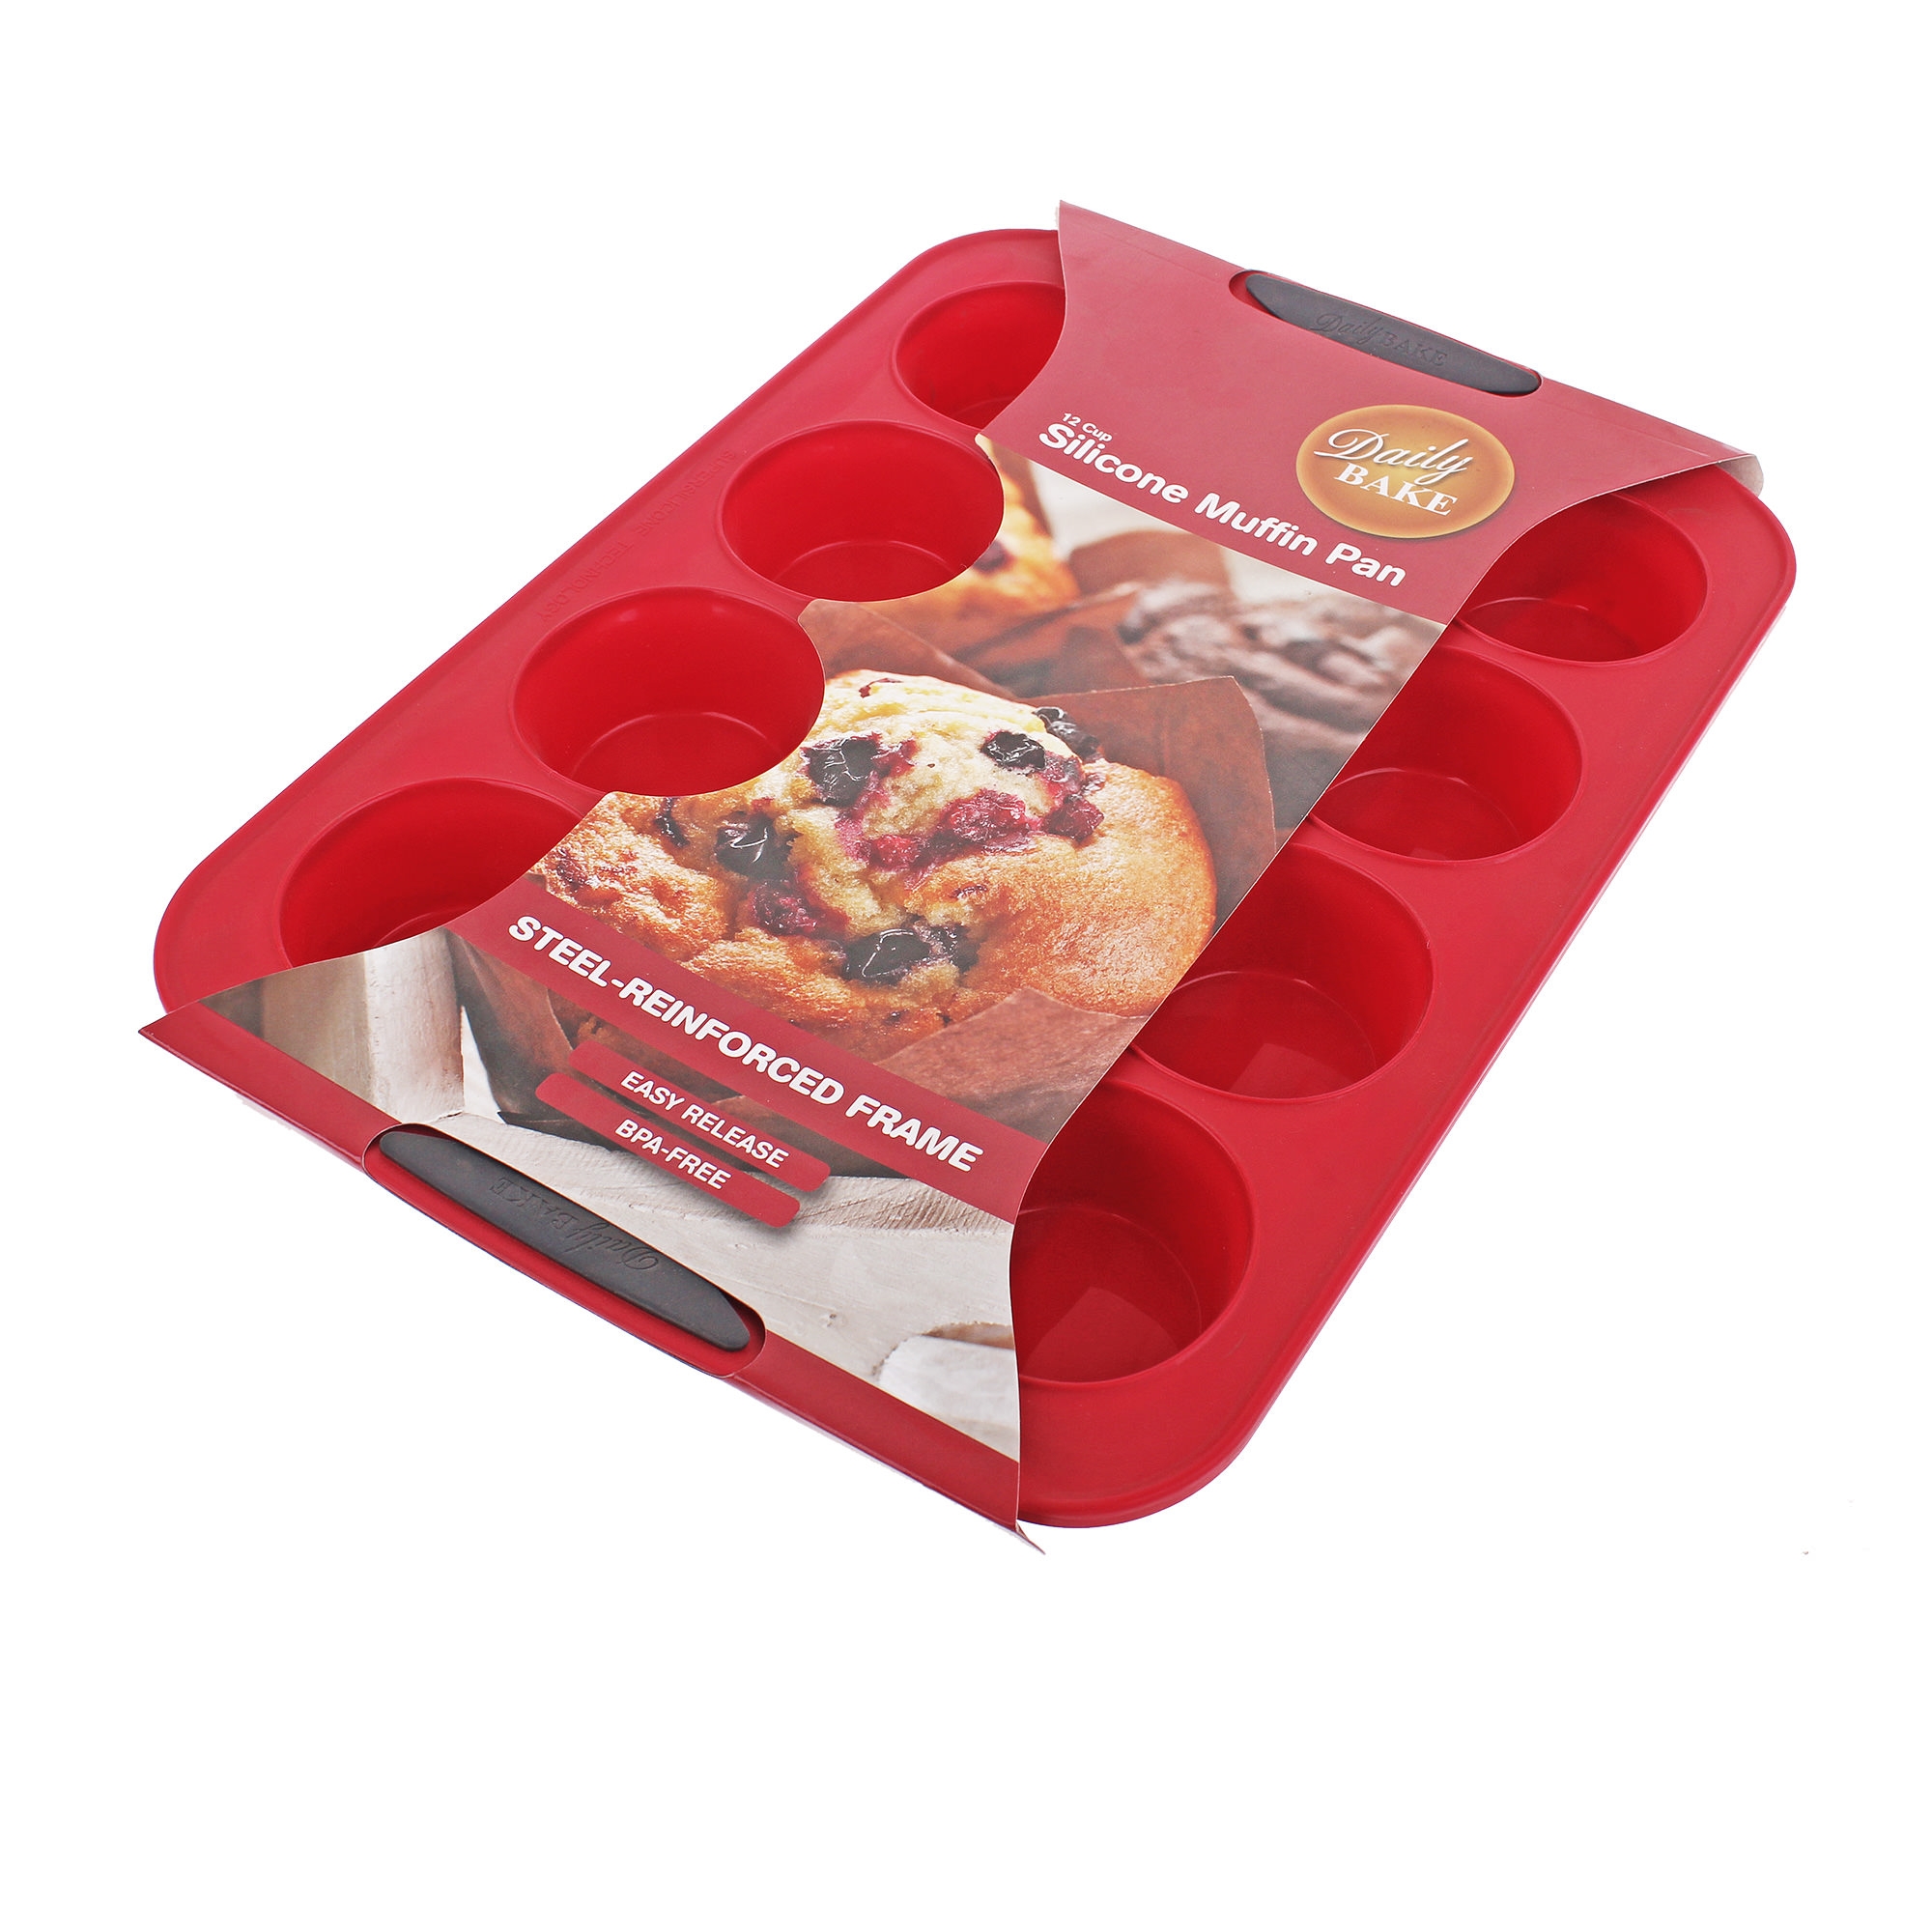 Daily Bake Silicone Muffin Pan 12 Cup Red Image 2